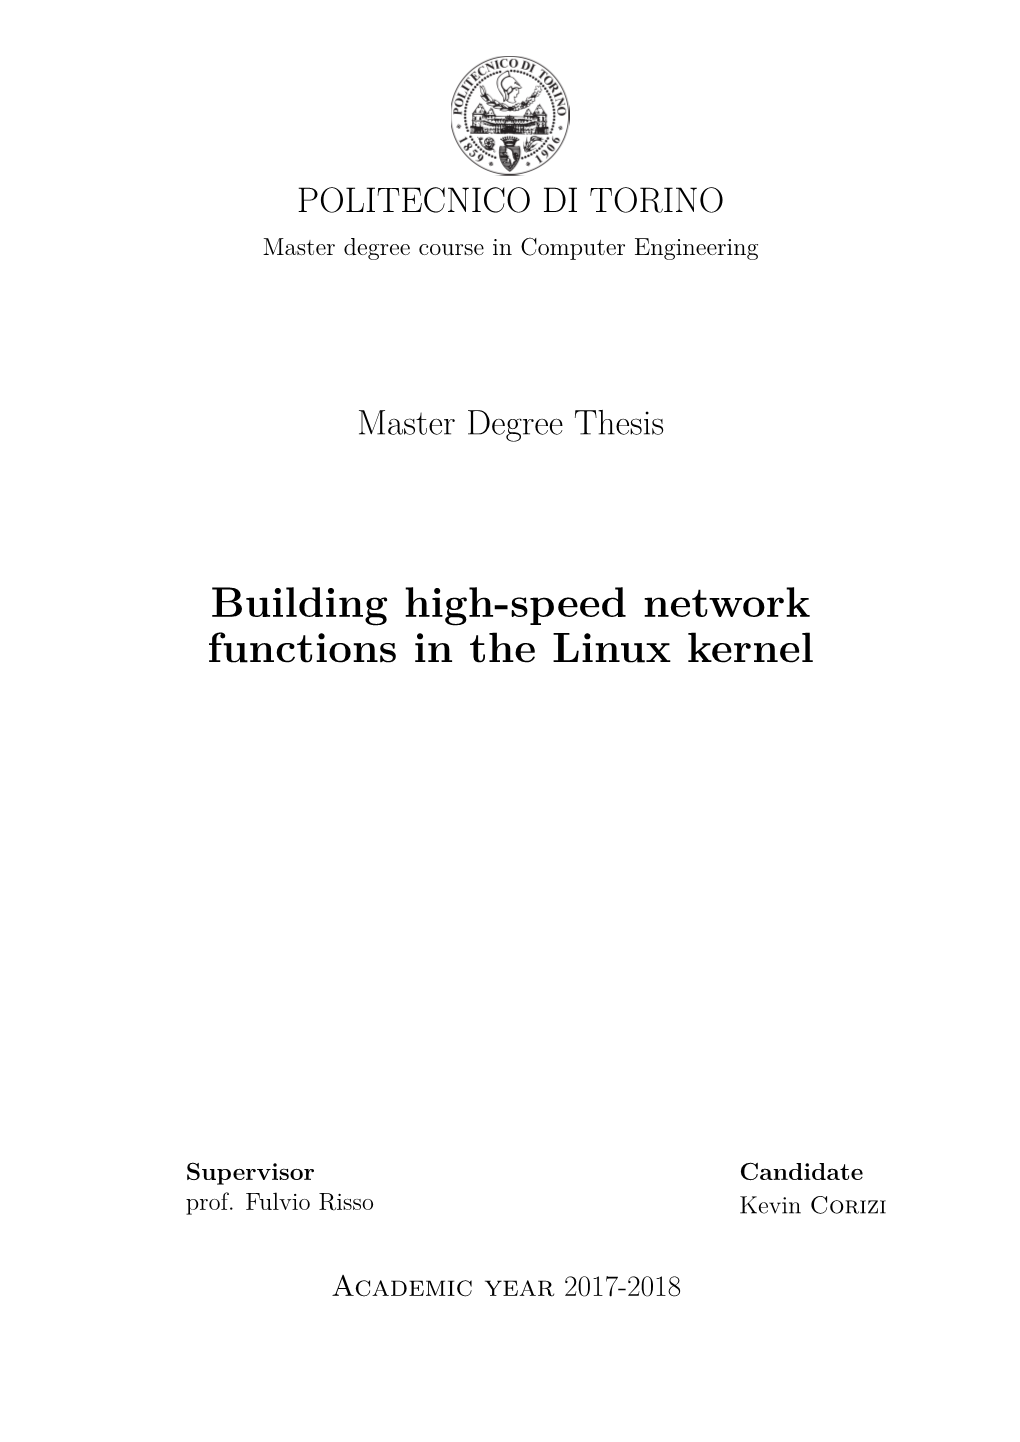 Building High-Speed Network Functions in the Linux Kernel